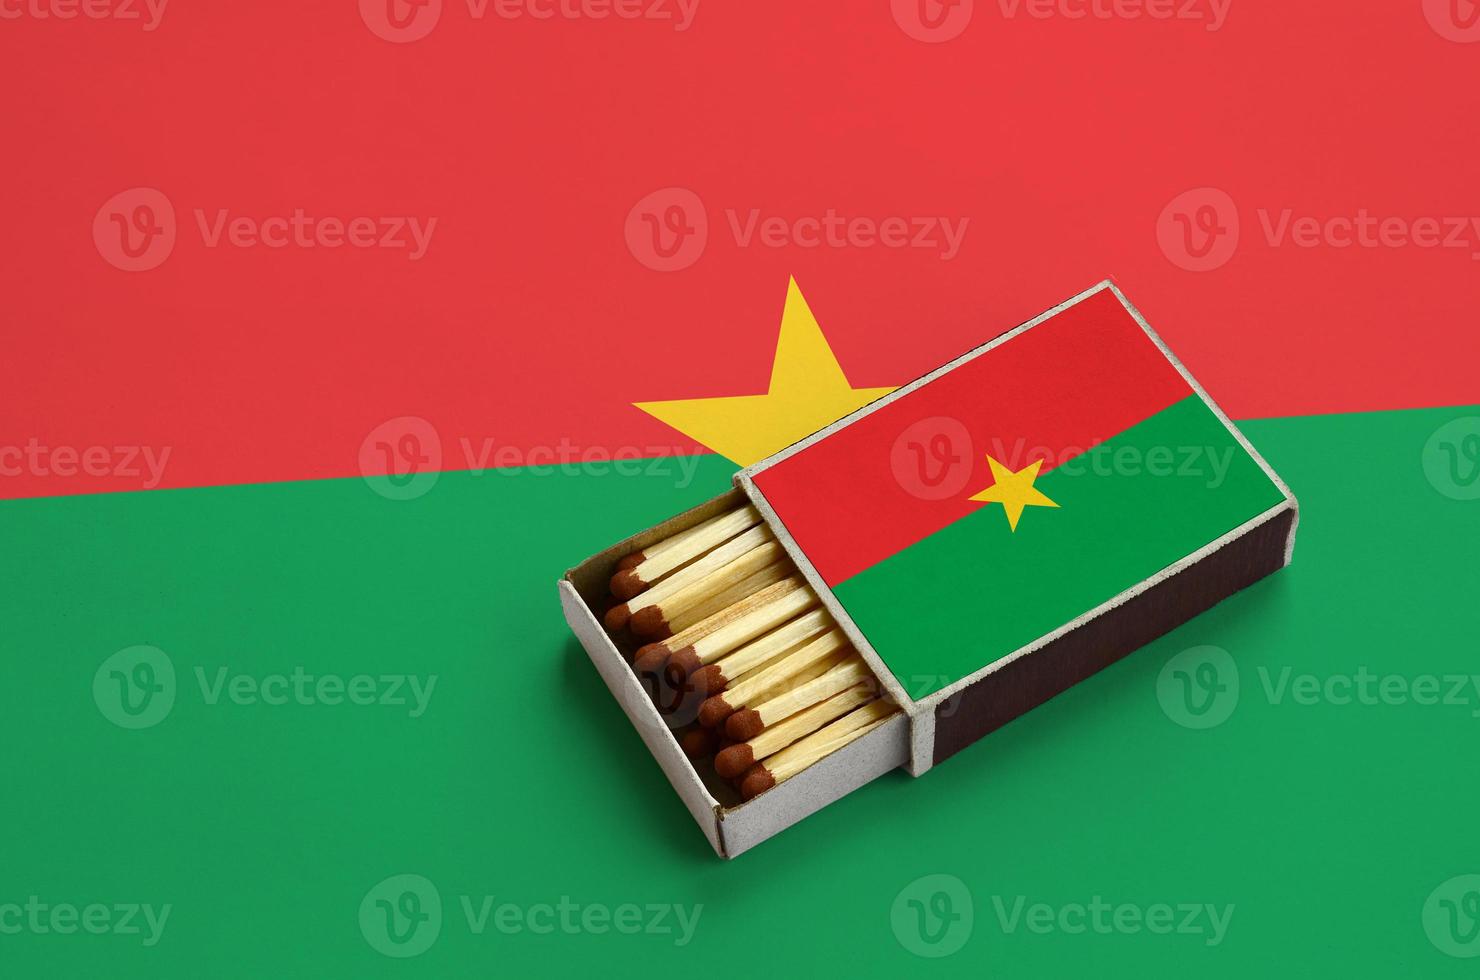 Burkina Faso flag is shown in an open matchbox, which is filled with matches and lies on a large flag photo